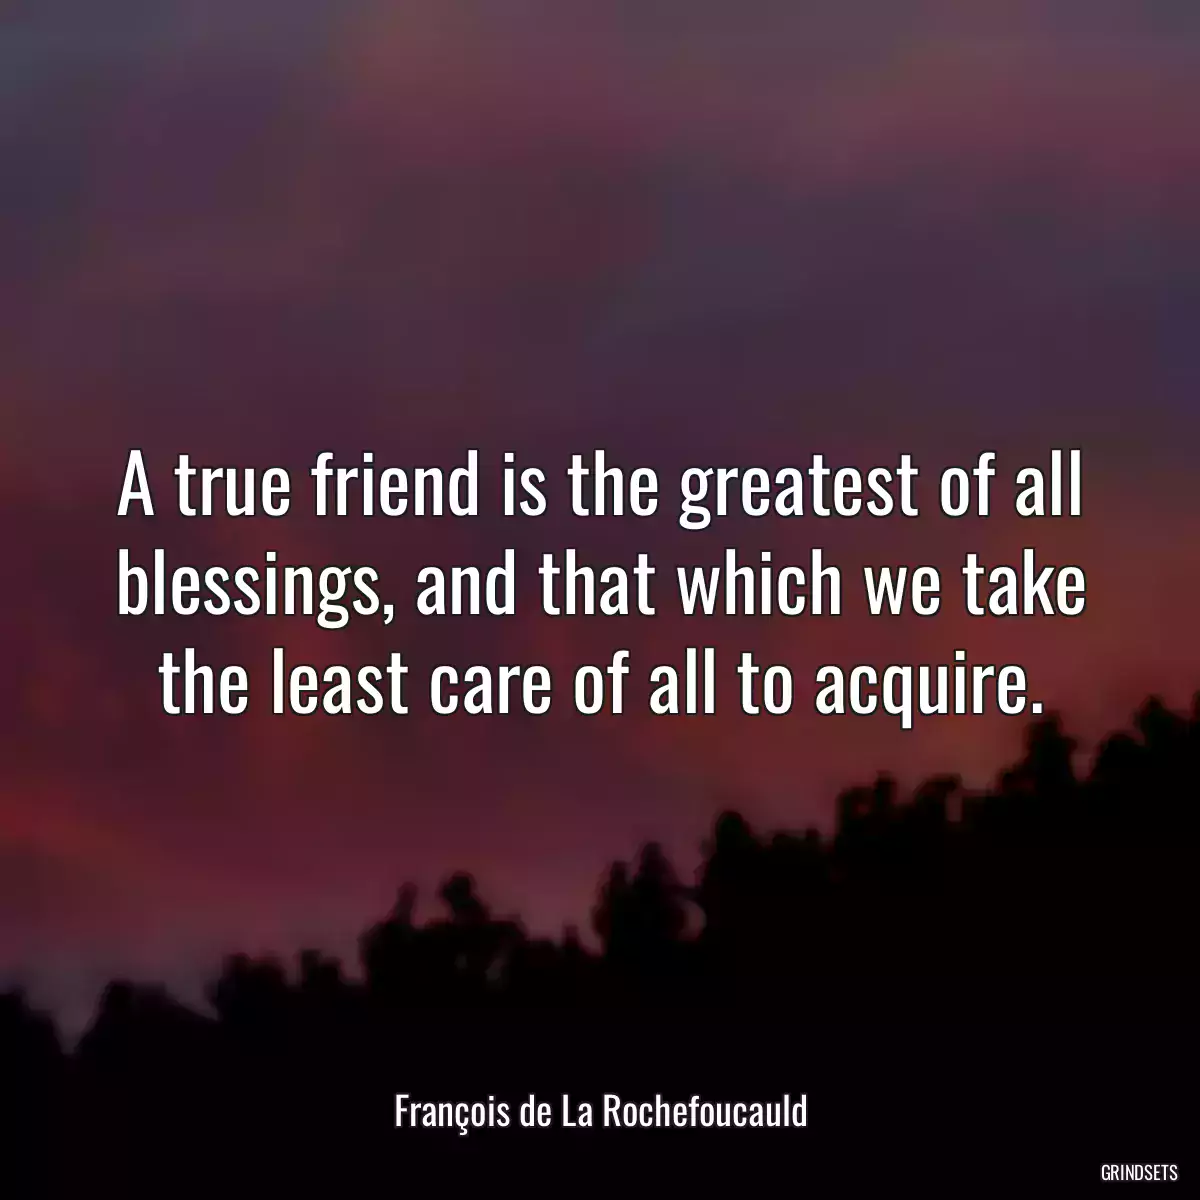 A true friend is the greatest of all blessings, and that which we take the least care of all to acquire.